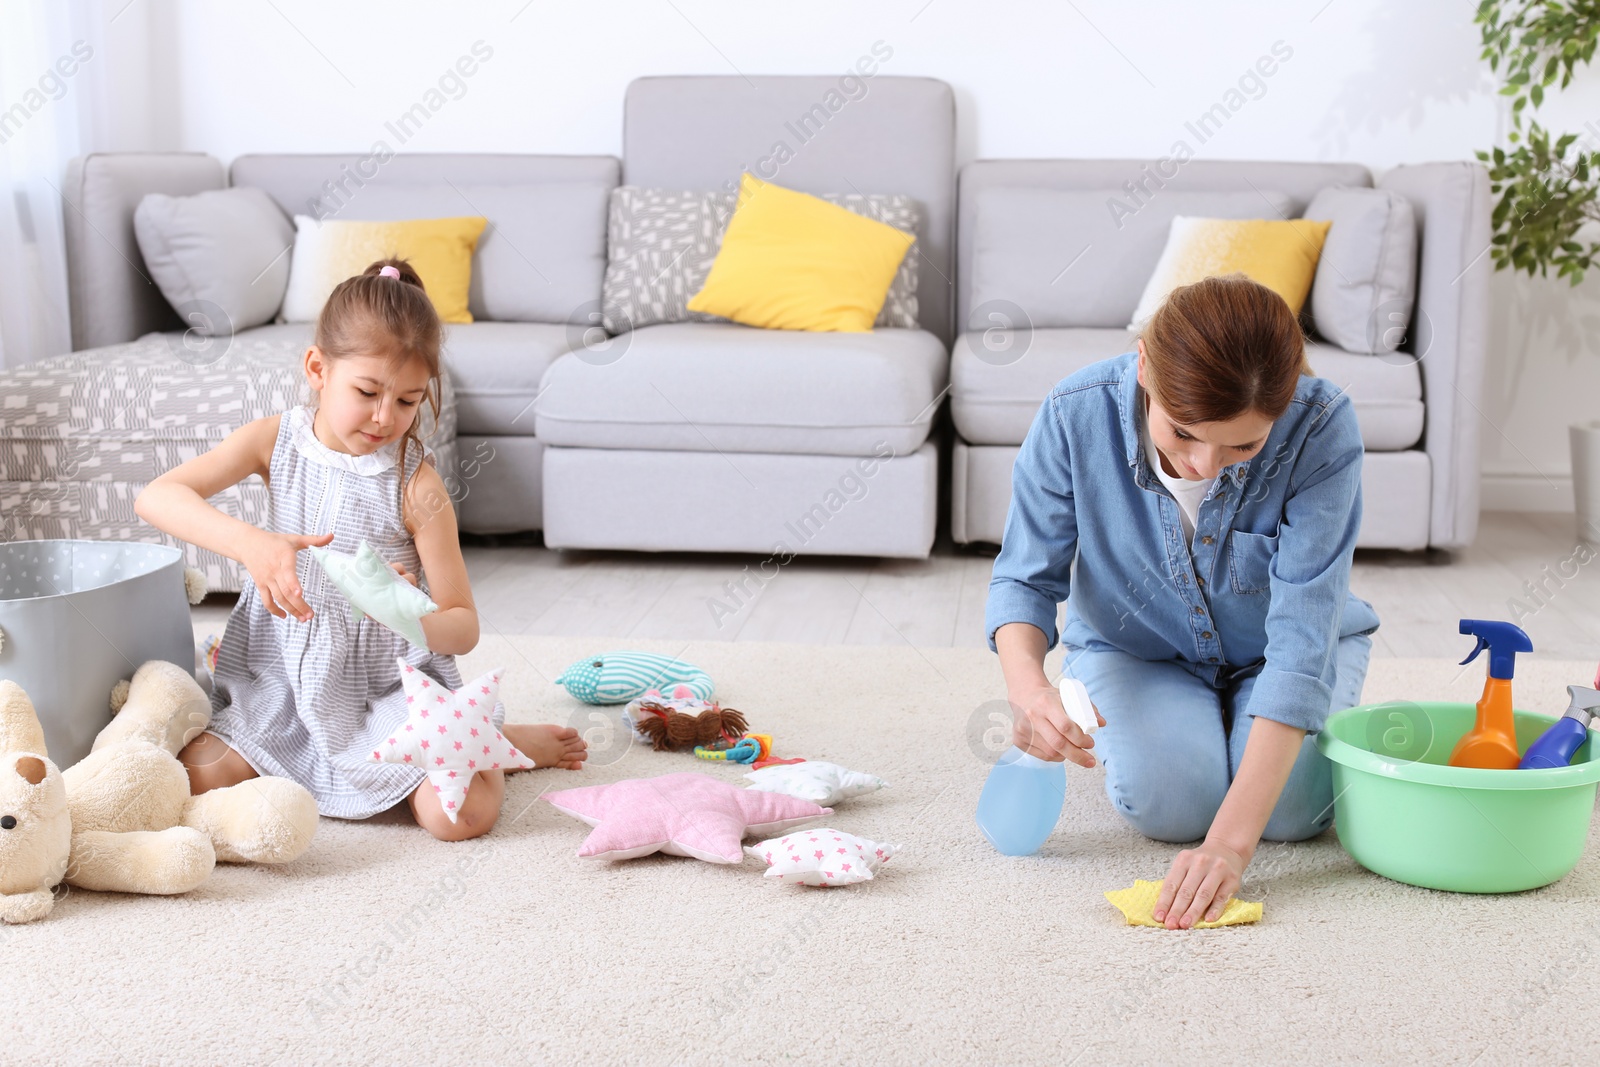 Photo of Housewife and daughter cleaning room together